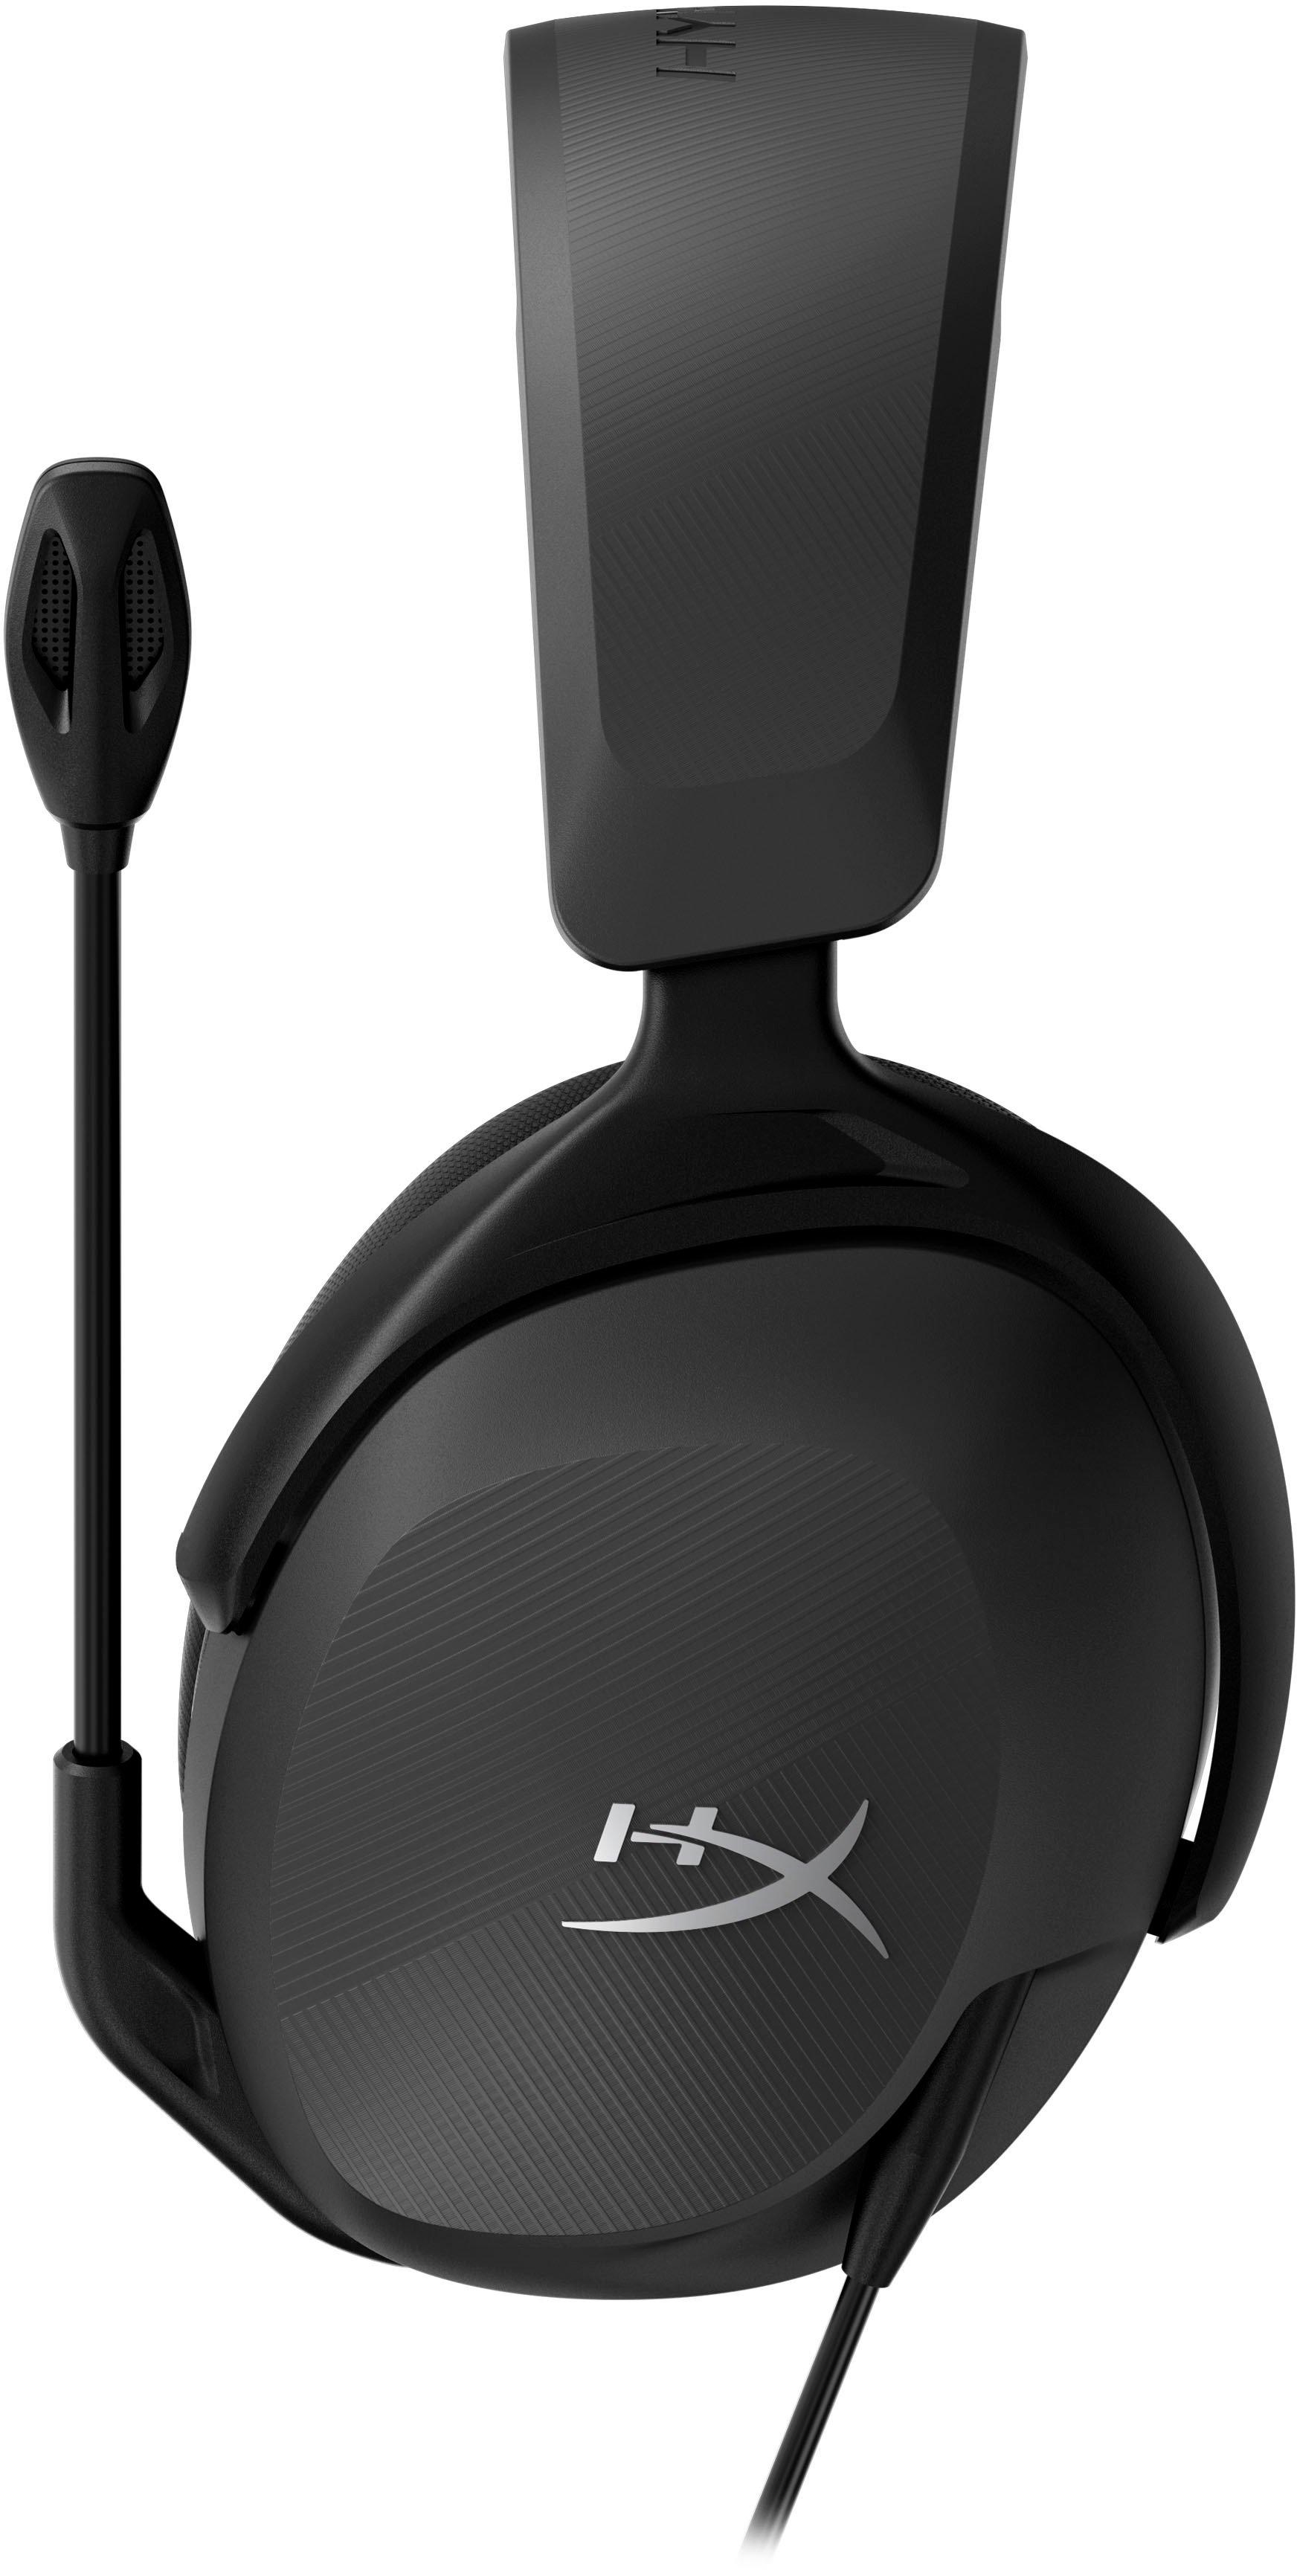 HyperX Cloud Stinger 2 Wired Gaming Headset for PC